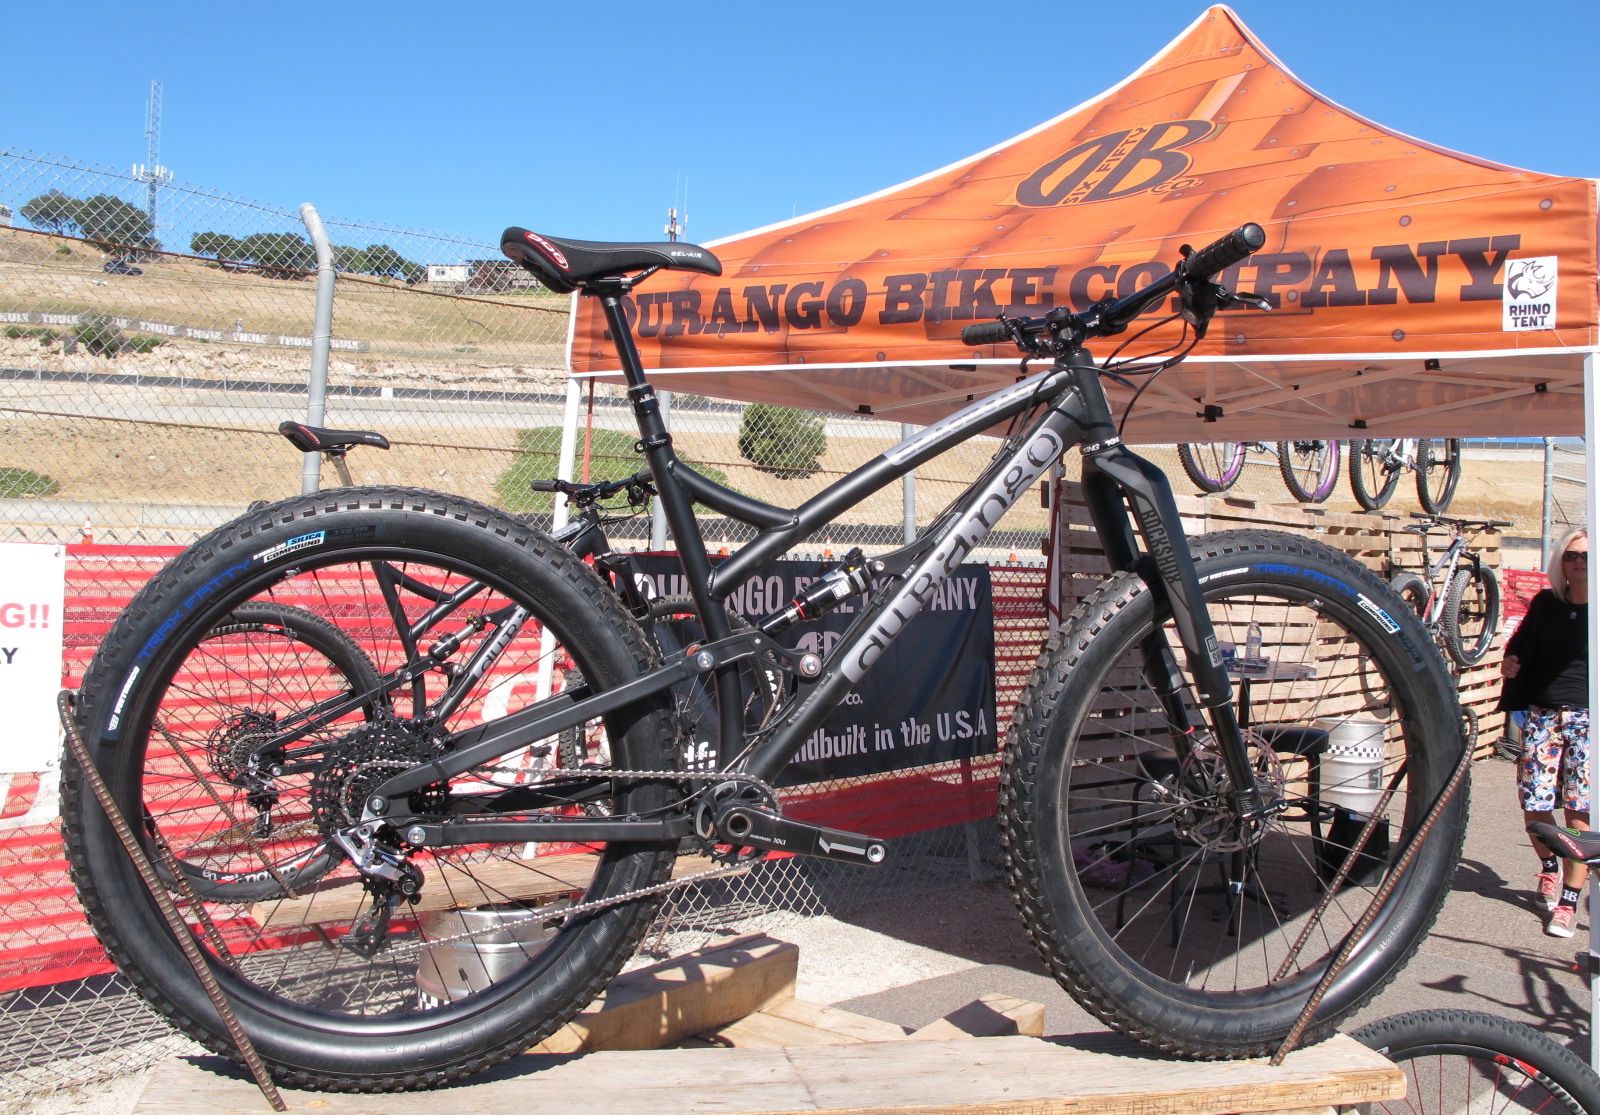 This is the Black Jack from Durango Bike Company. It's a 29er frame that is currently shod with a 650B + wheel set up. The rear end is set to 120mm of travel via a modified Horst Linkage.

The entire frame is made in the USA, from the tubes, billeting and even the rear axle on the 148mm hub. You'll find over sized Enduro brand bearings at all the pivots too. Add in the 16.7" seat stays, 67.5 degree head angle and this bike is made to last and to really get the most out of your trail riding experience.